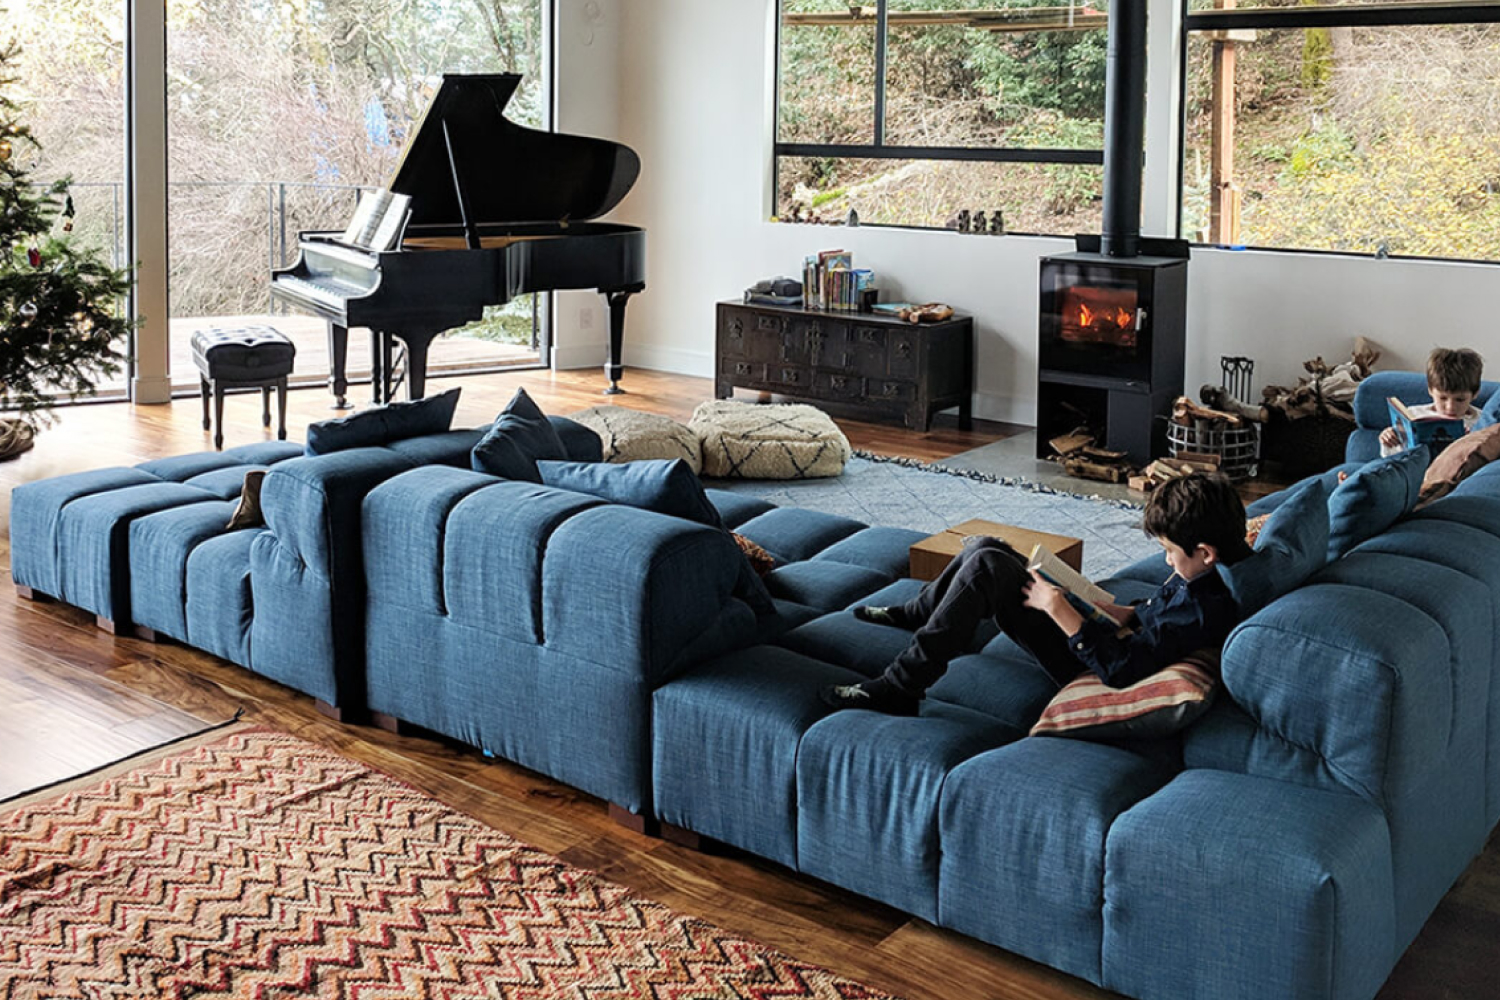 A cozy living room scene with two boys relaxing on a Tufted sofa, each engrossed in reading a book. A grand piano sits near large windows offering a view of trees, and a warm fireplace adds to the room's ambiance.